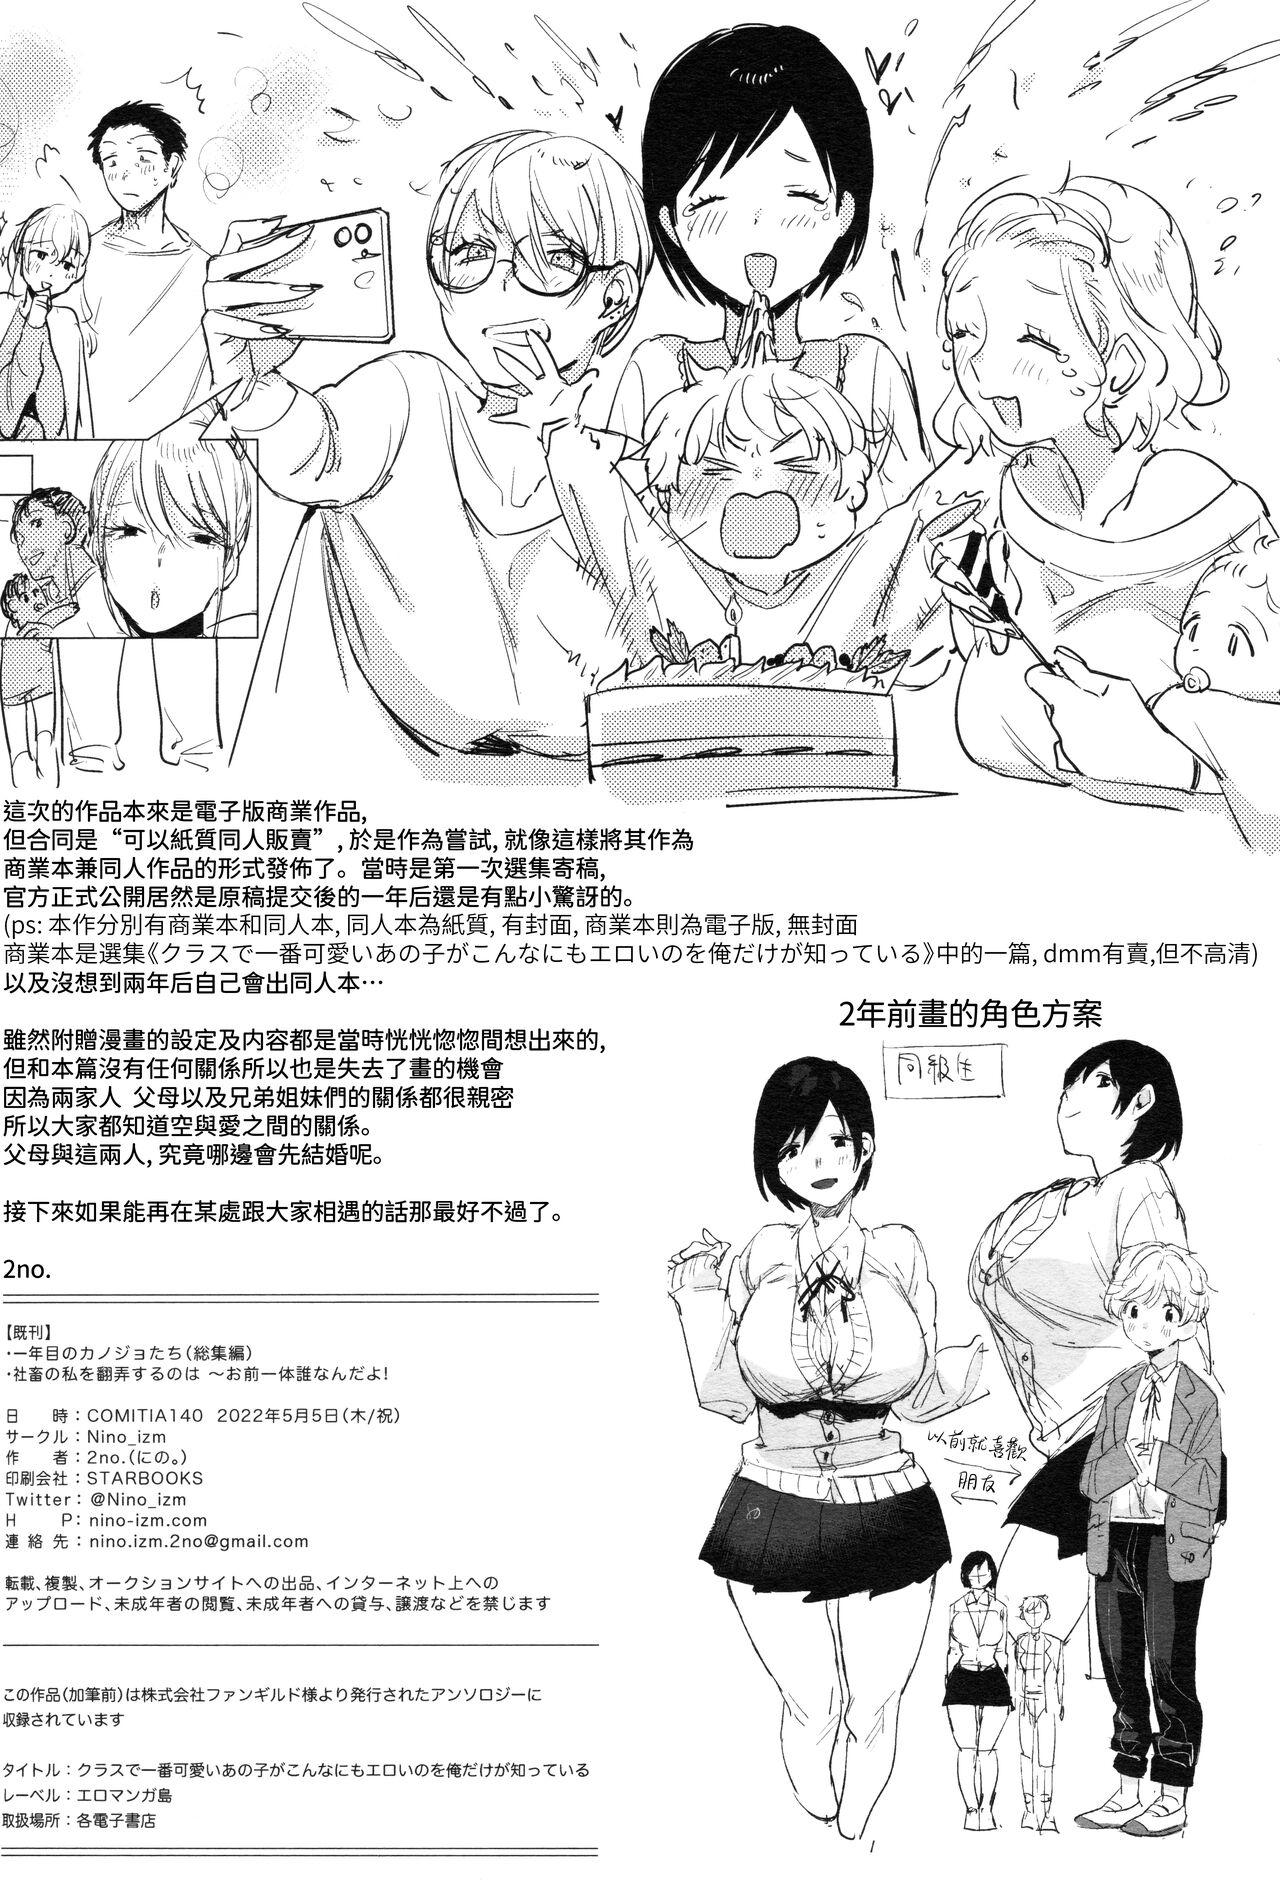 From Haikou Memories - Original Funny - Page 34